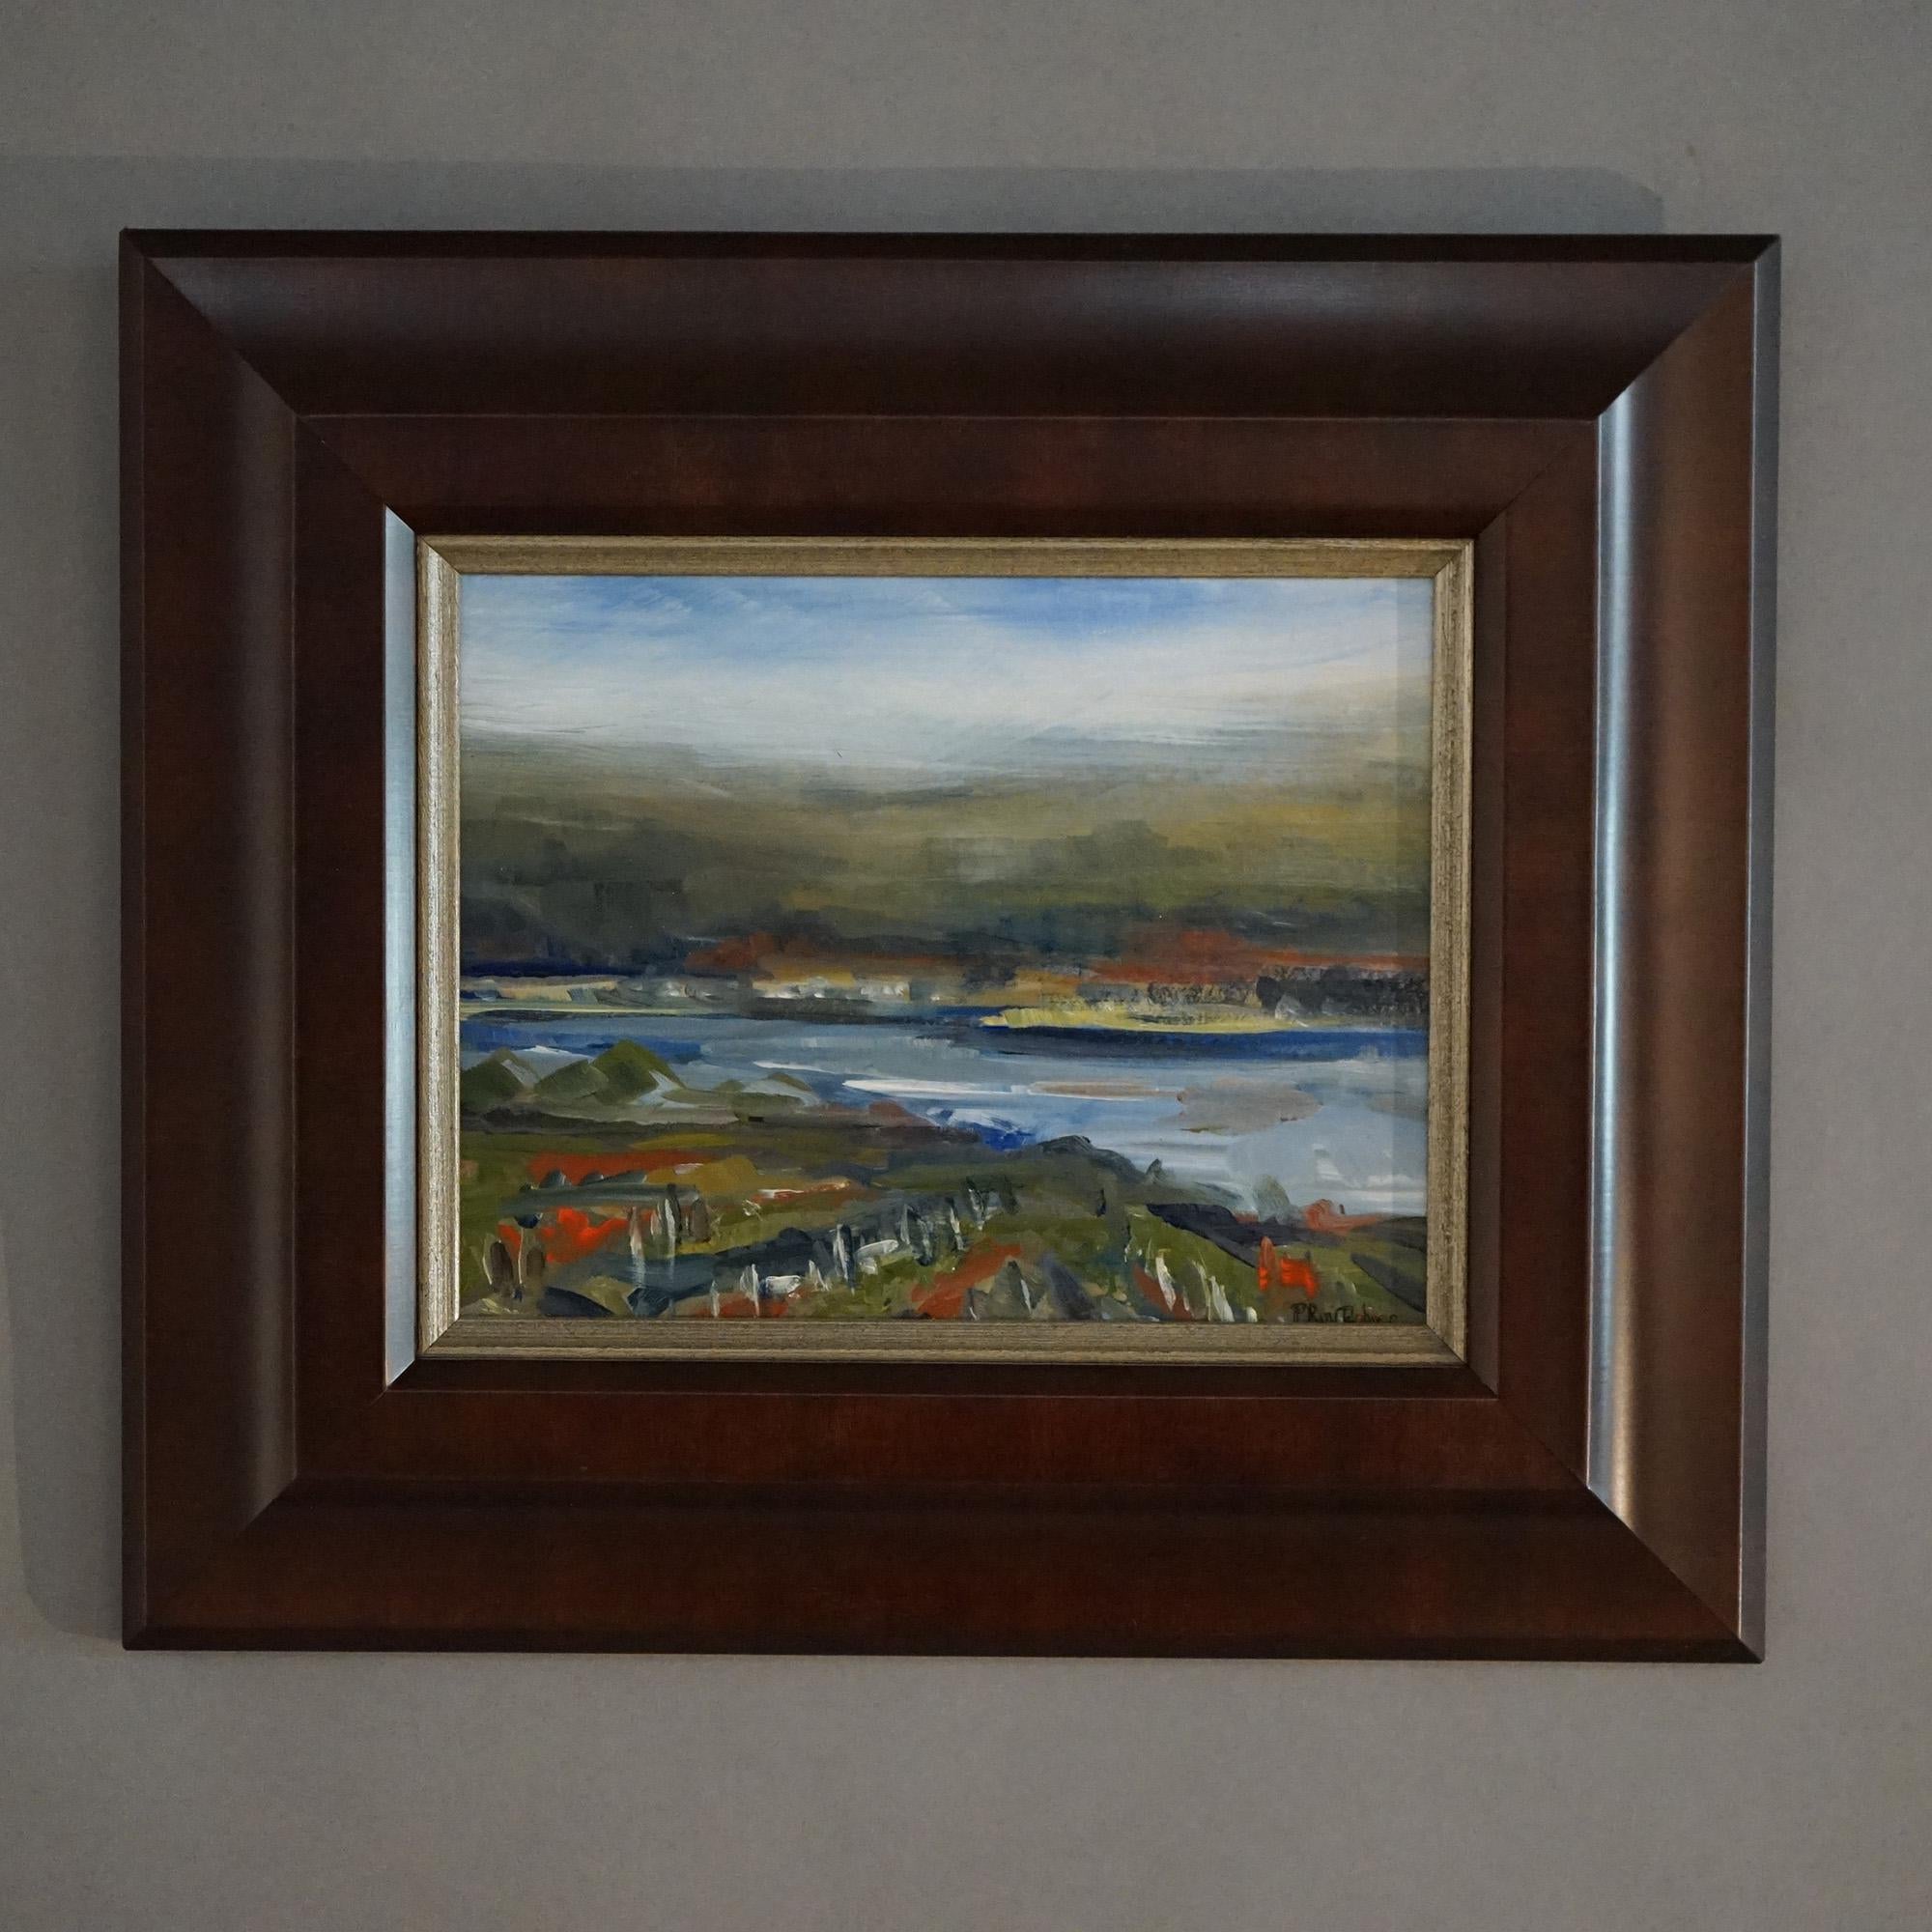 Hand-Painted Impressionistic Painting Landscape Of Finger Lakes & Vineyard by PR Rohrer 20thC For Sale